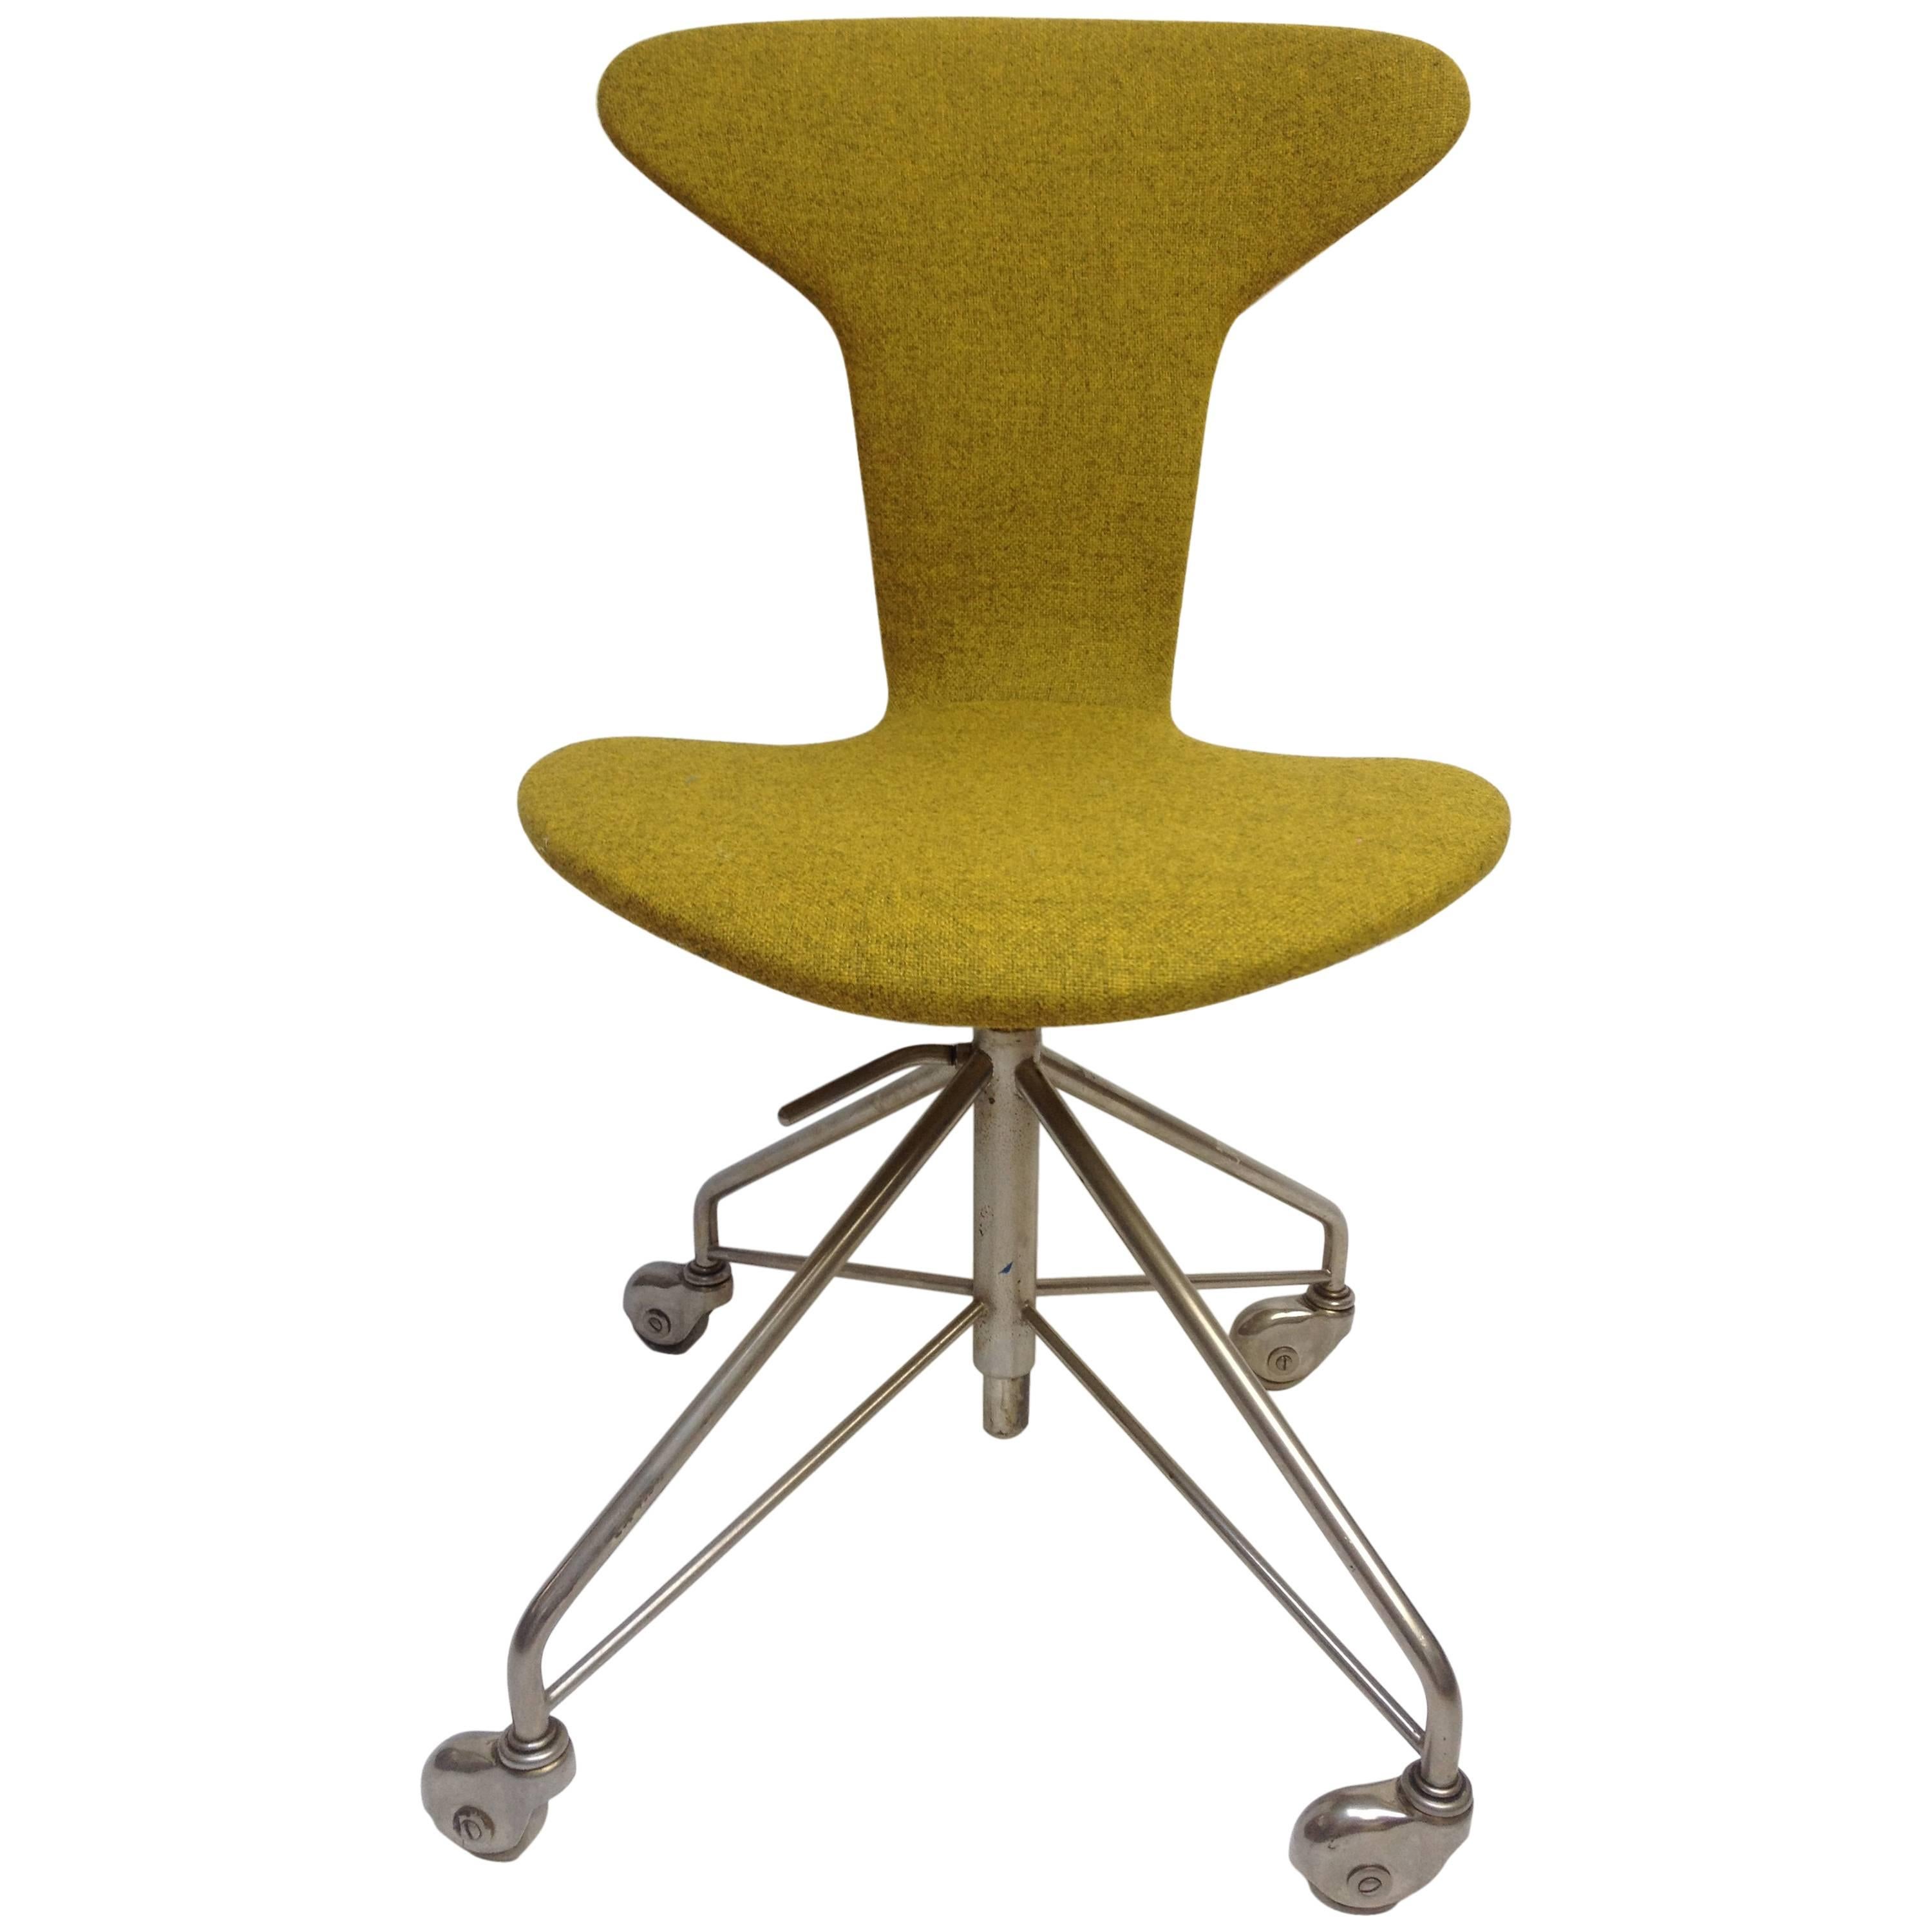 Incredibly Rare 1950s "Mosquito Chair" by Arne Jacobsen for Fritz Hansen For Sale